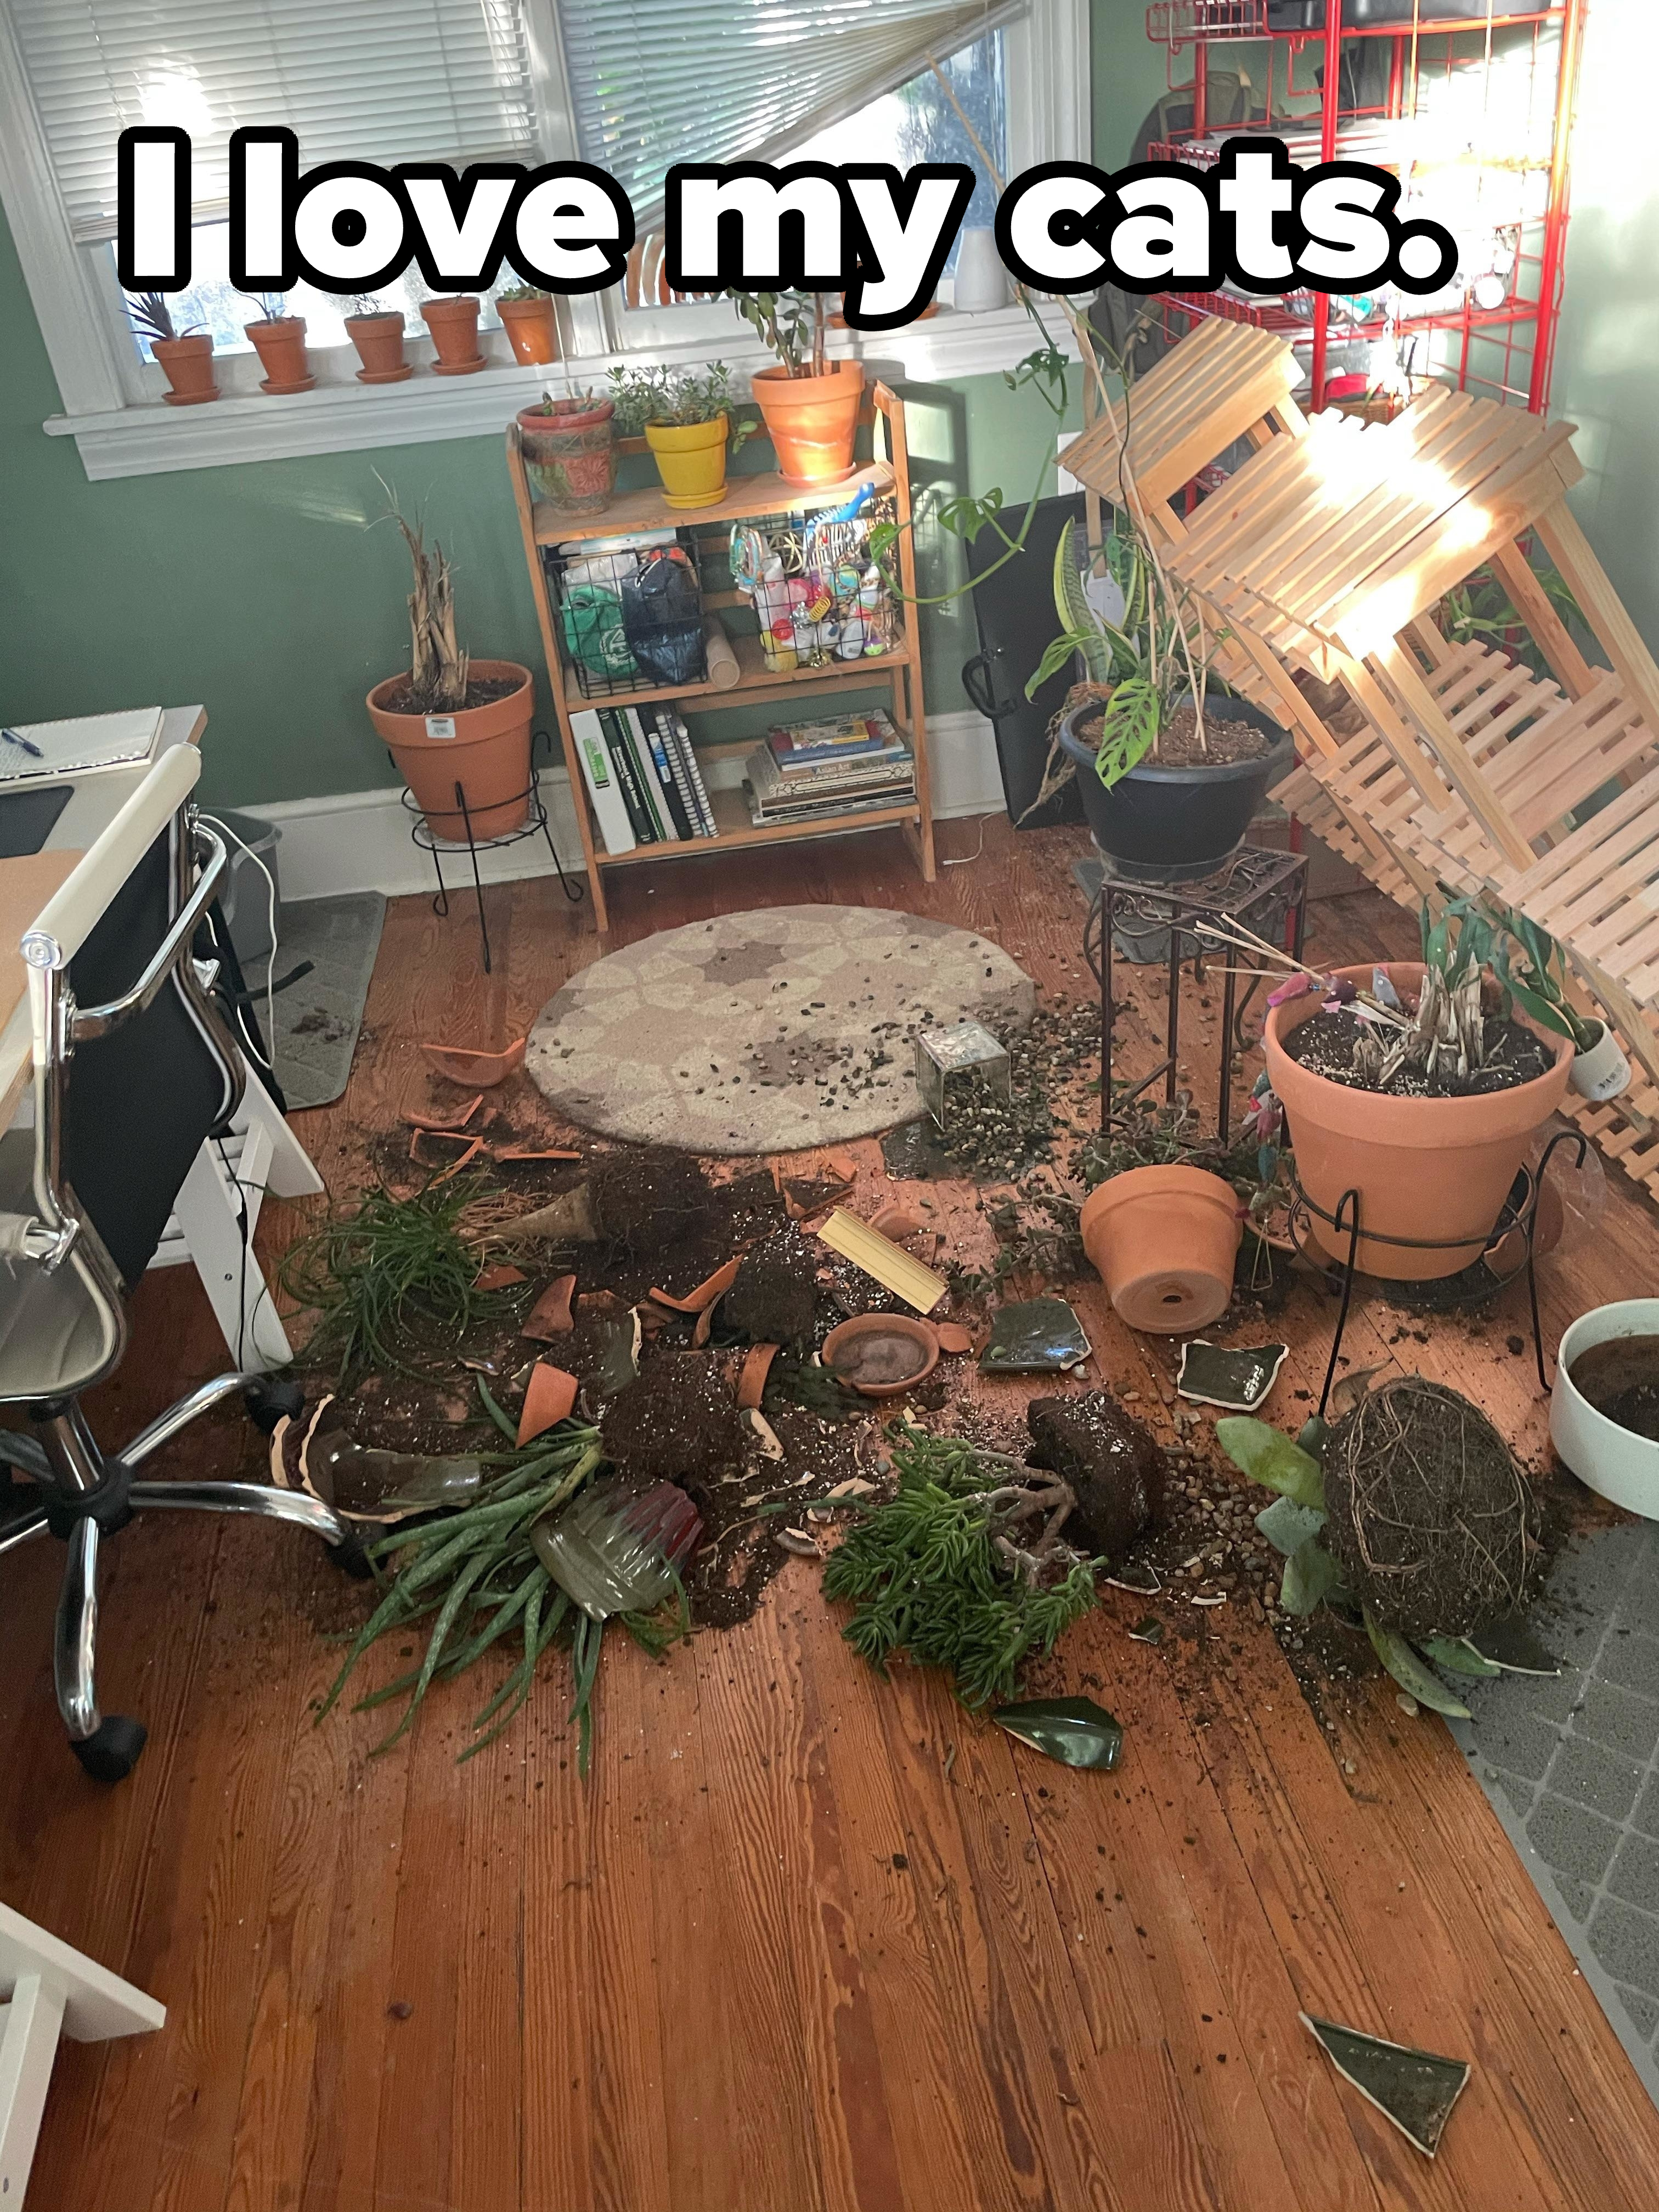 An array of house plants and their spilled soil all over a wood floor, with the caption &quot;I love my cats&quot;